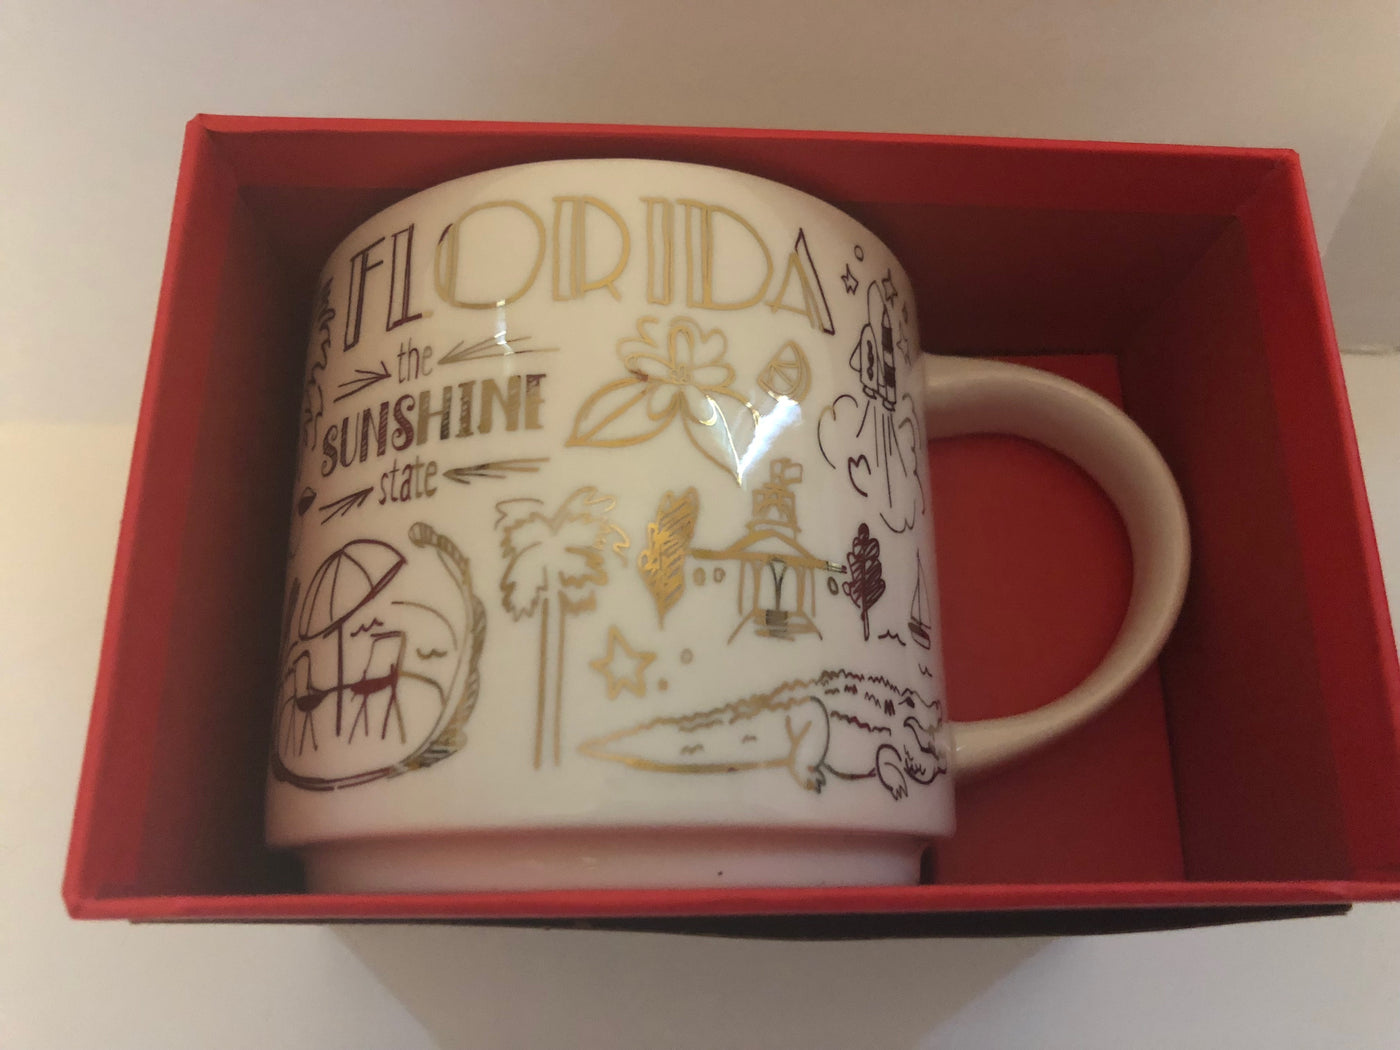 Starbucks Been There Series Holiday Florida Limited Coffee Mug New with Box